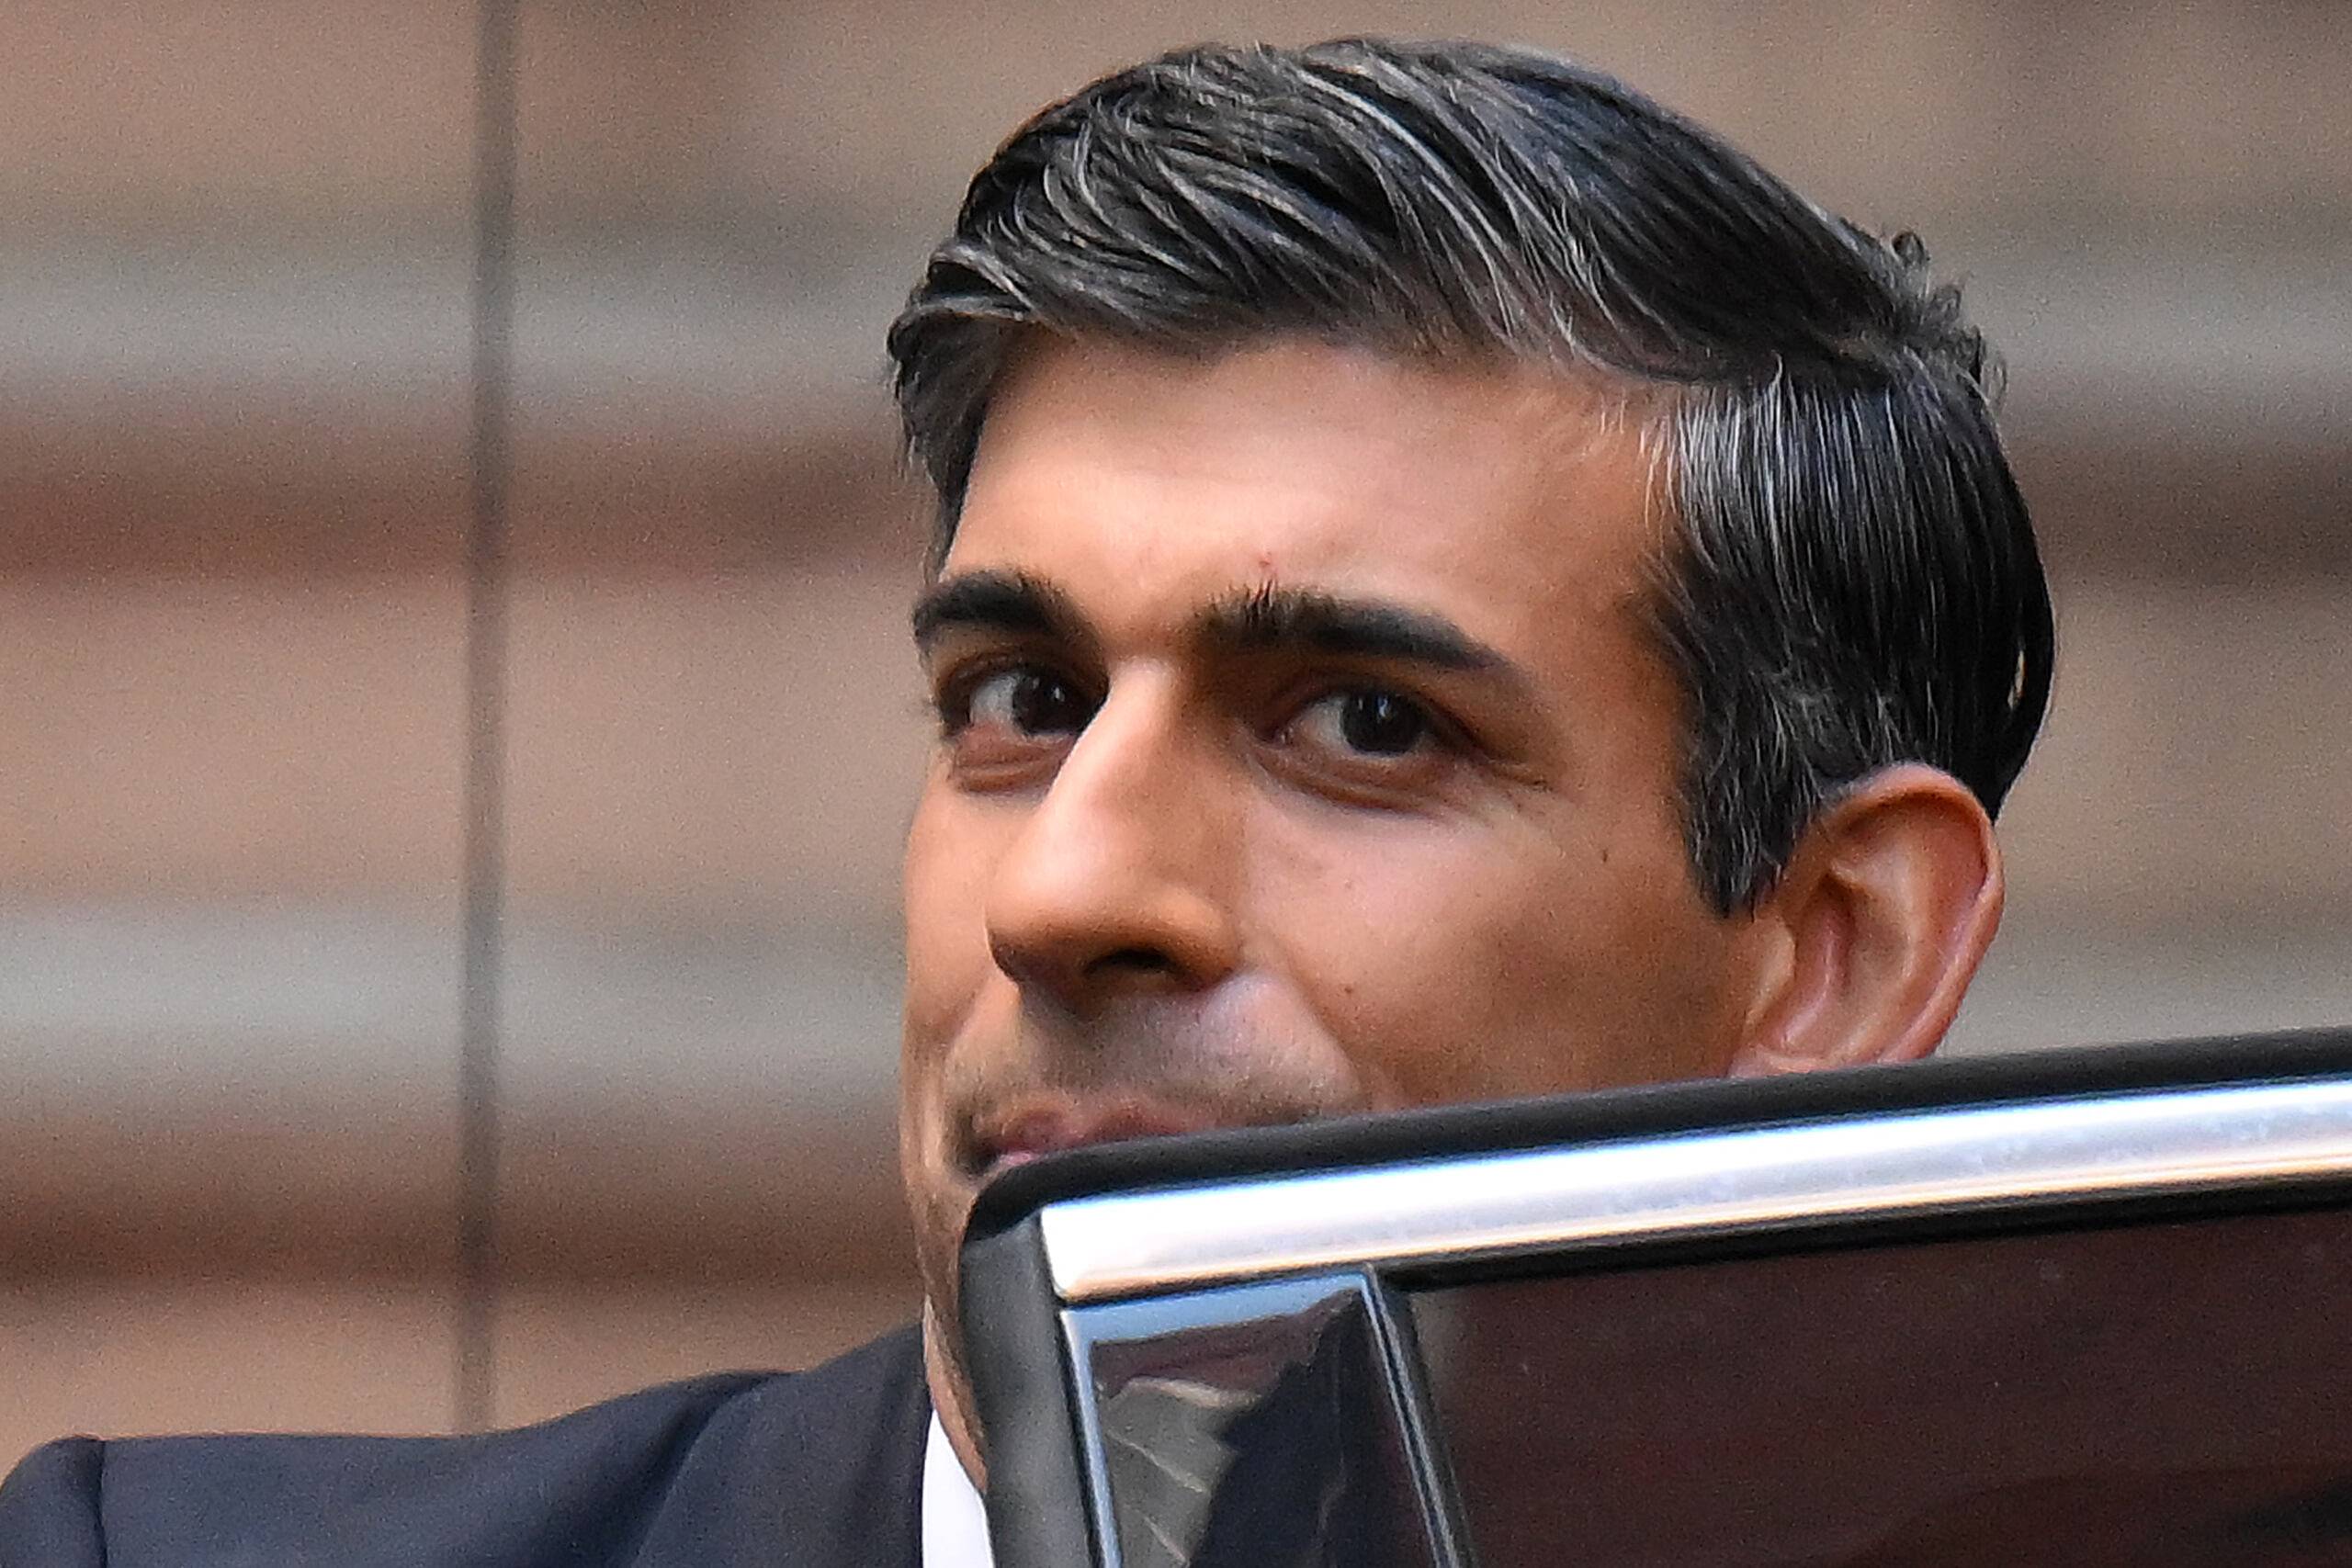 New Conservative Party leader and incoming prime minister Rishi Sunak enters a car as he leaves from Conservative Party Headquarters in central London having been announced as the winner of the Conservative Party leadership contest, on October 24, 2022. - Britain's next prime minister, former finance chief Rishi Sunak, inherits a UK economy that was headed for recession even before the recent turmoil triggered by Liz Truss. (Photo by Daniel LEAL / AFP)